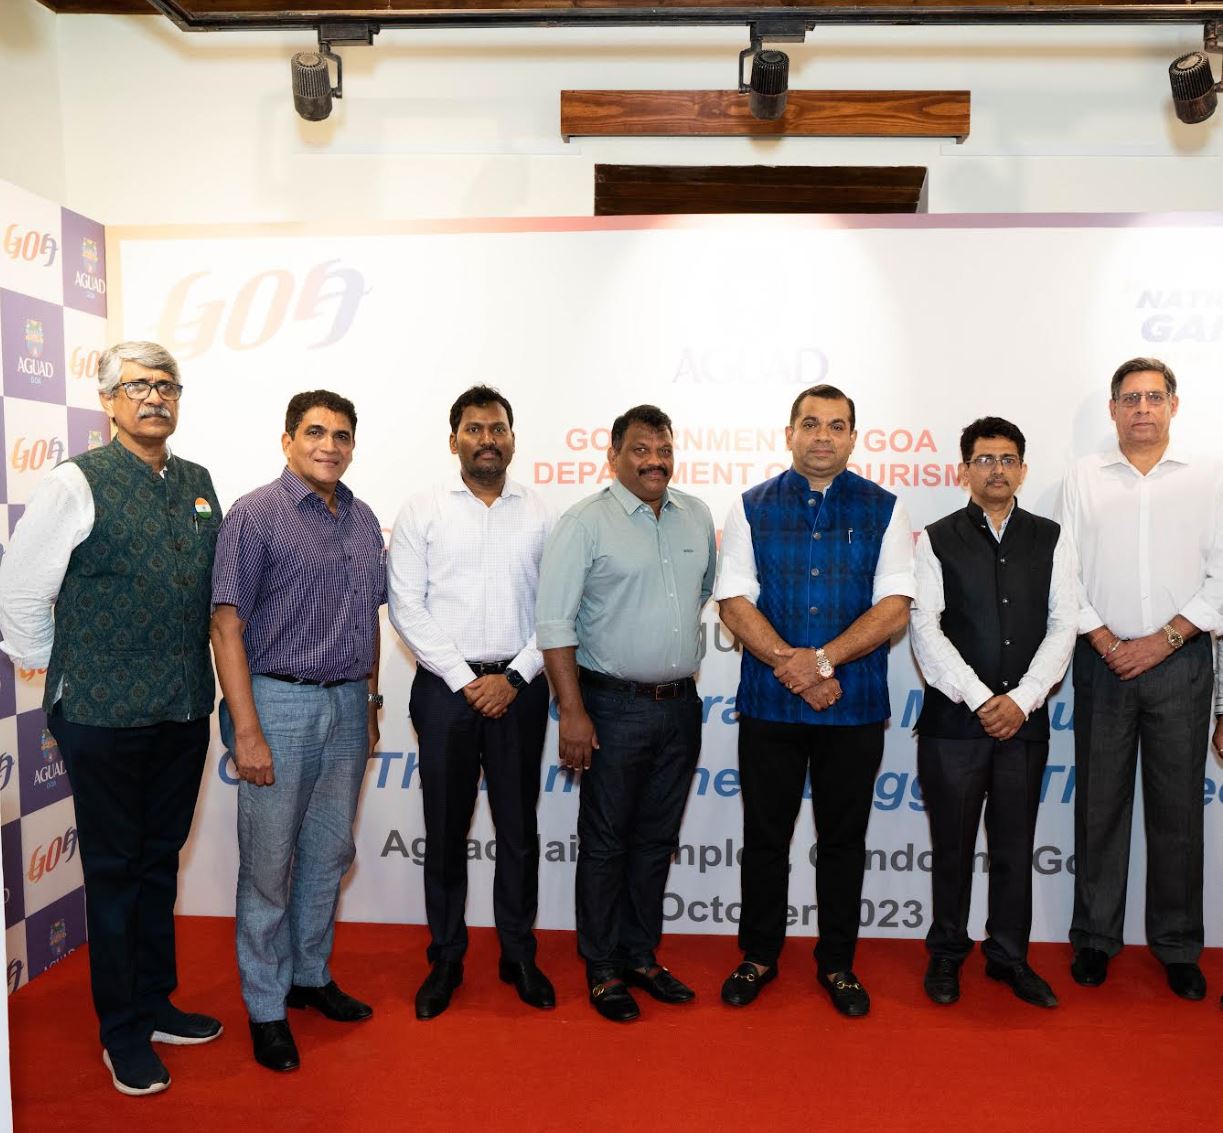 Historian Sanjeev Sardesai, SKAL international Goa member Ernest Dias, Director of Tourism and MD of GTDC Suneel Anchipaka,MLA of Calangute Micheal Lobo, Tourism Minister Rohan Khaunte, President of TTAG Nilesh Shah, Group CEO of Waterfront Experiences Pvt Ltd Naveen Chopra at the inaugural of Aguad Interactive Museum.